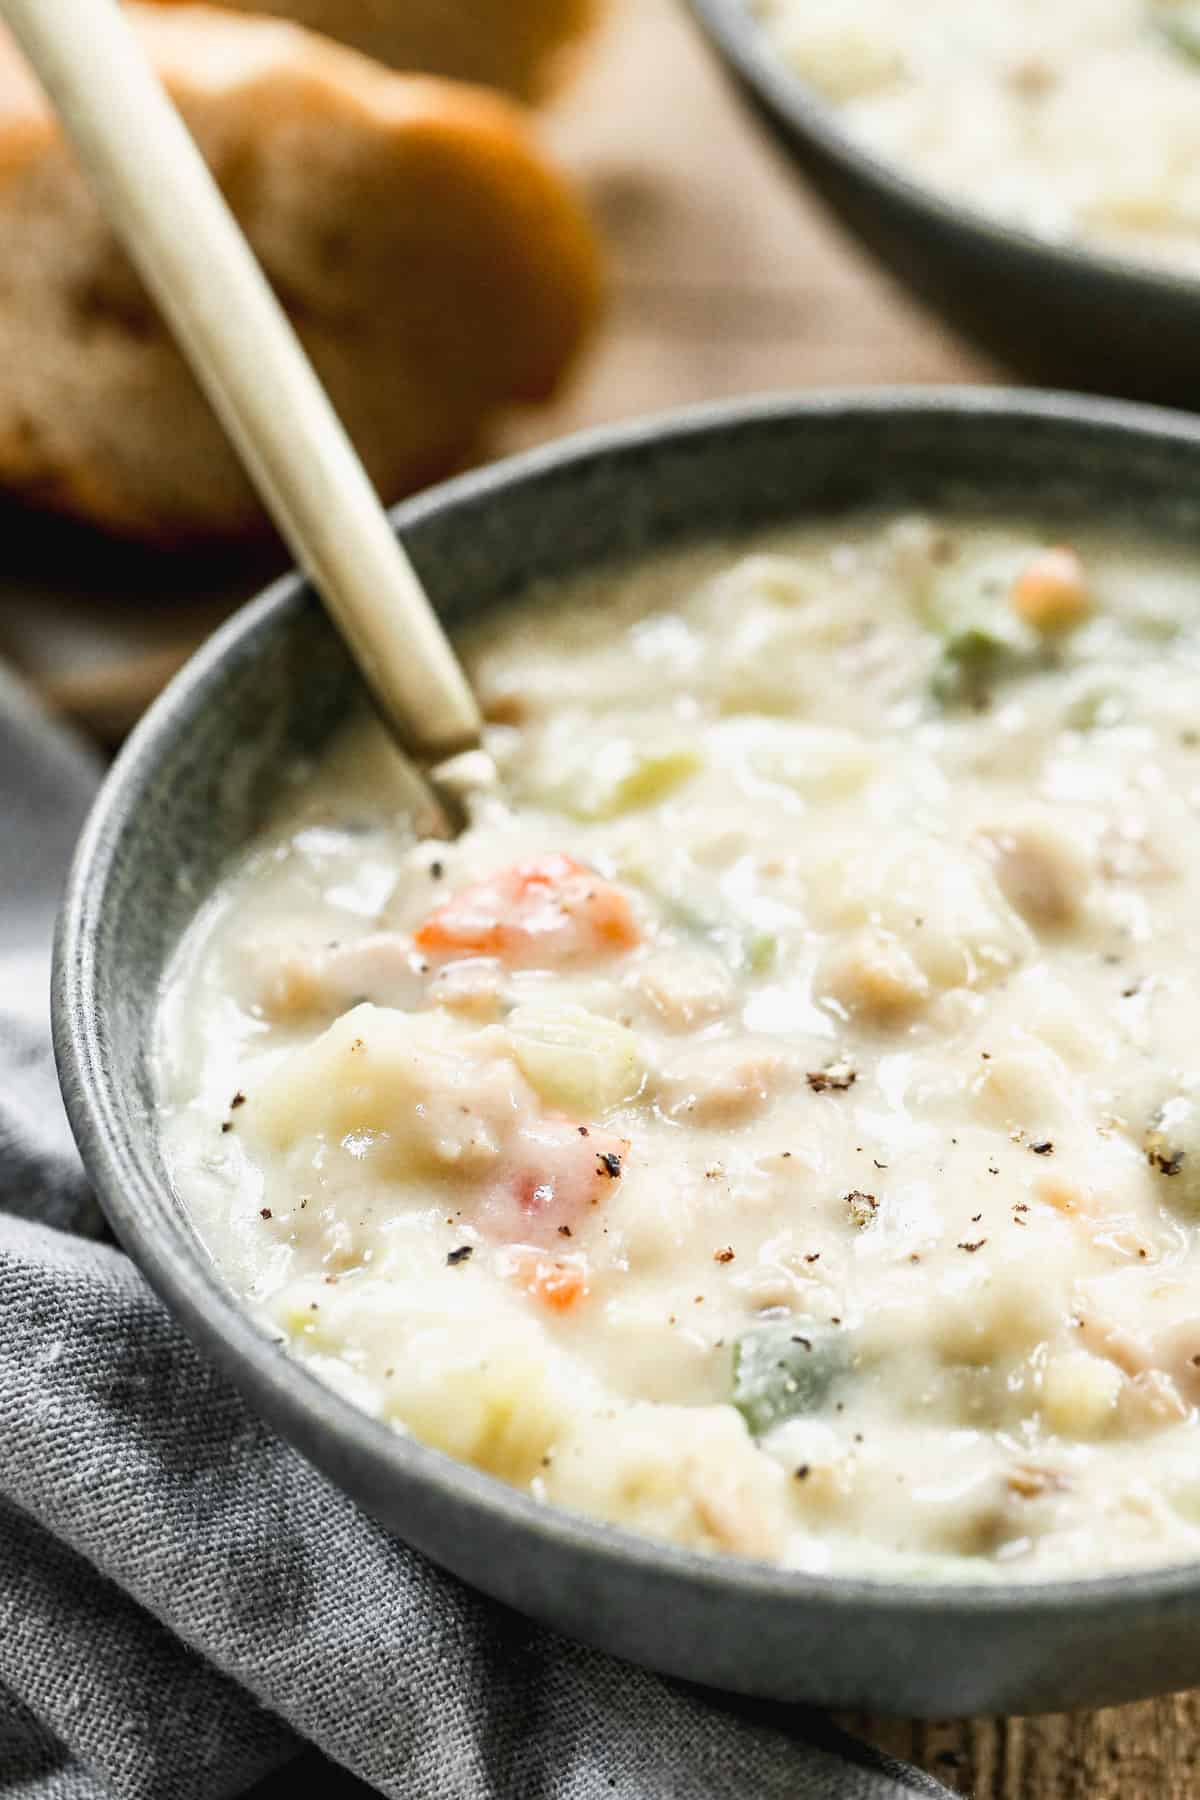 A close up image showing a bowl of easy Clam Chowder with a spoon in it.